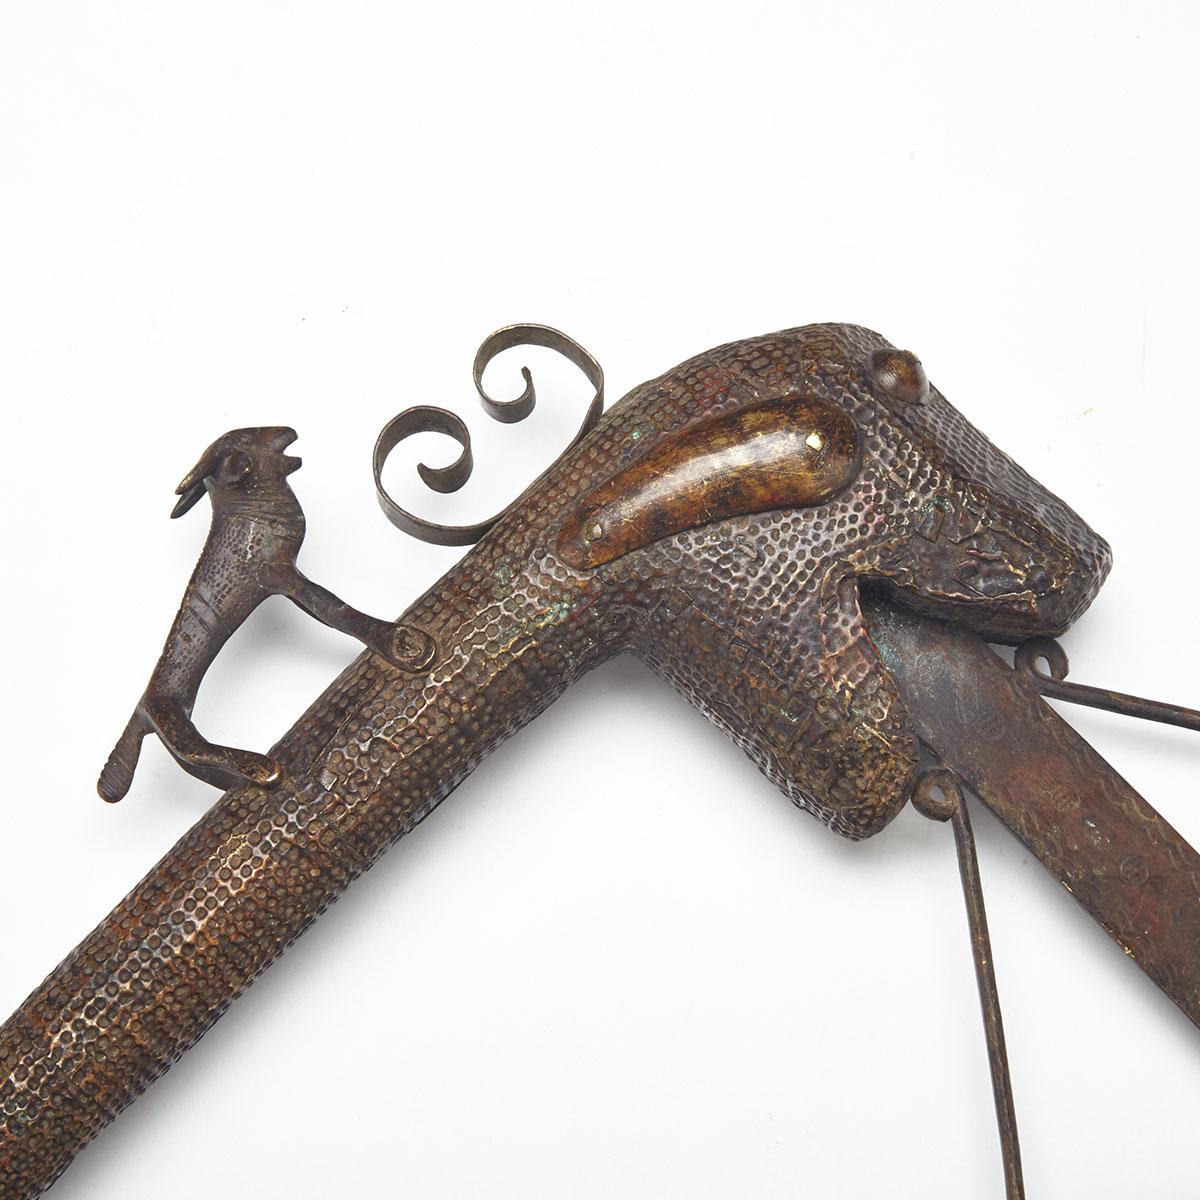 West African (Benin) Fon Ceremonial Septre, late 19th/early 20th century